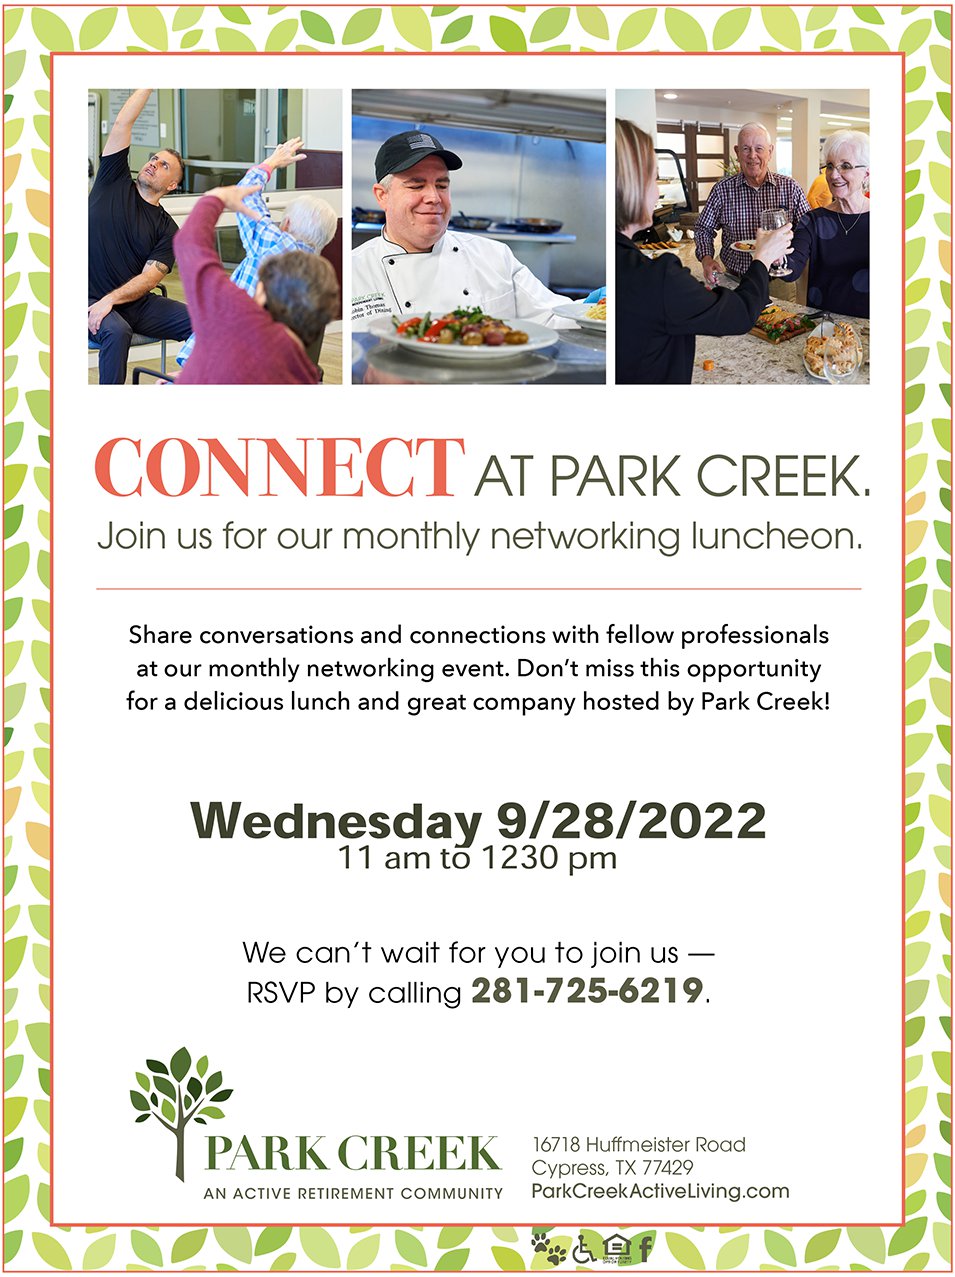 connect-park-creek-monthly-networking-luncheon-sept-2022.png